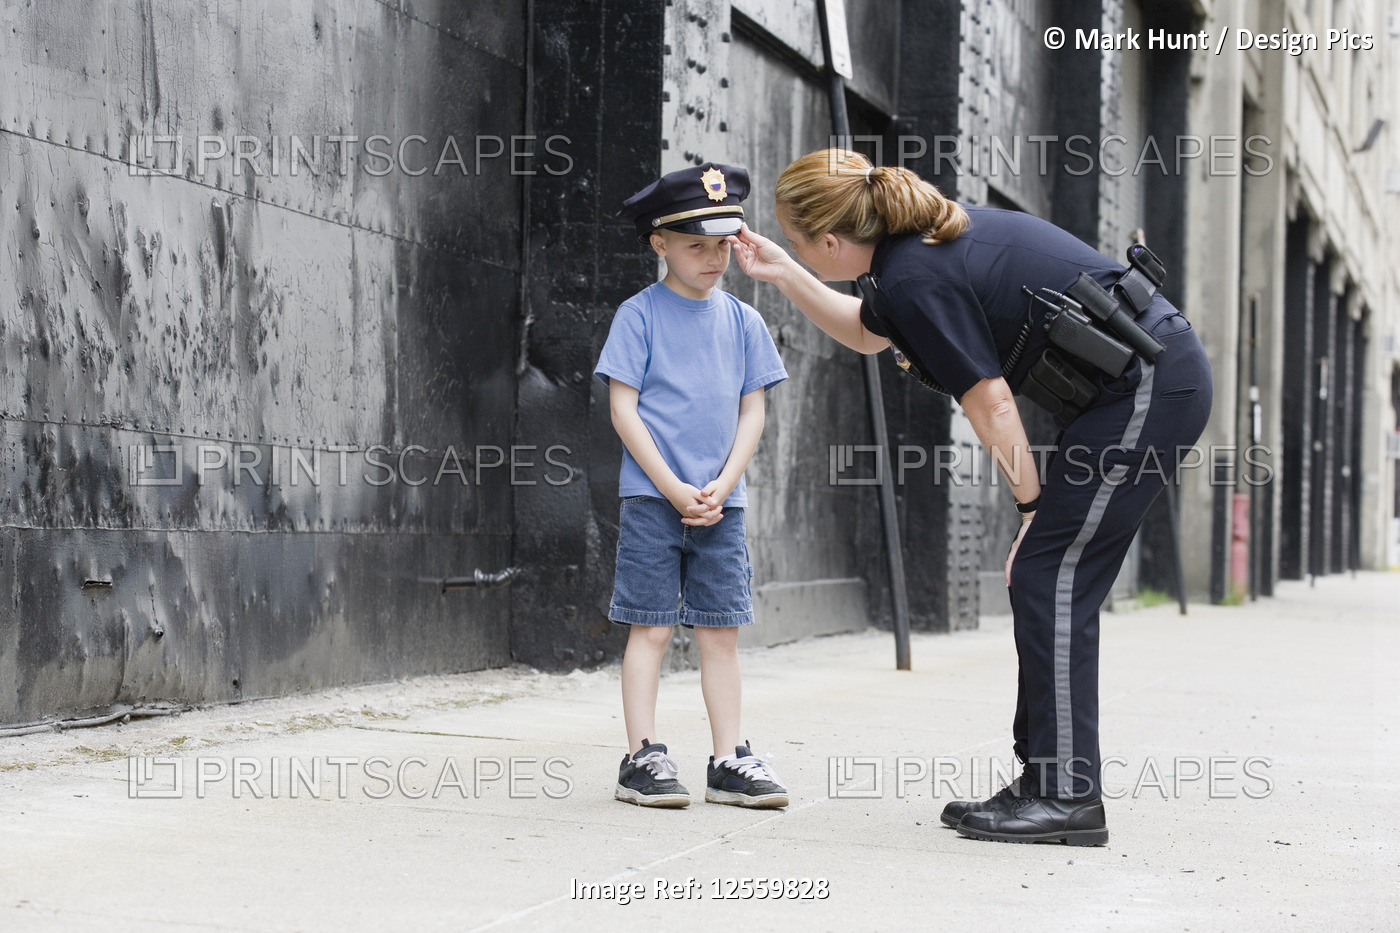 Woman police officer talking to a boy.